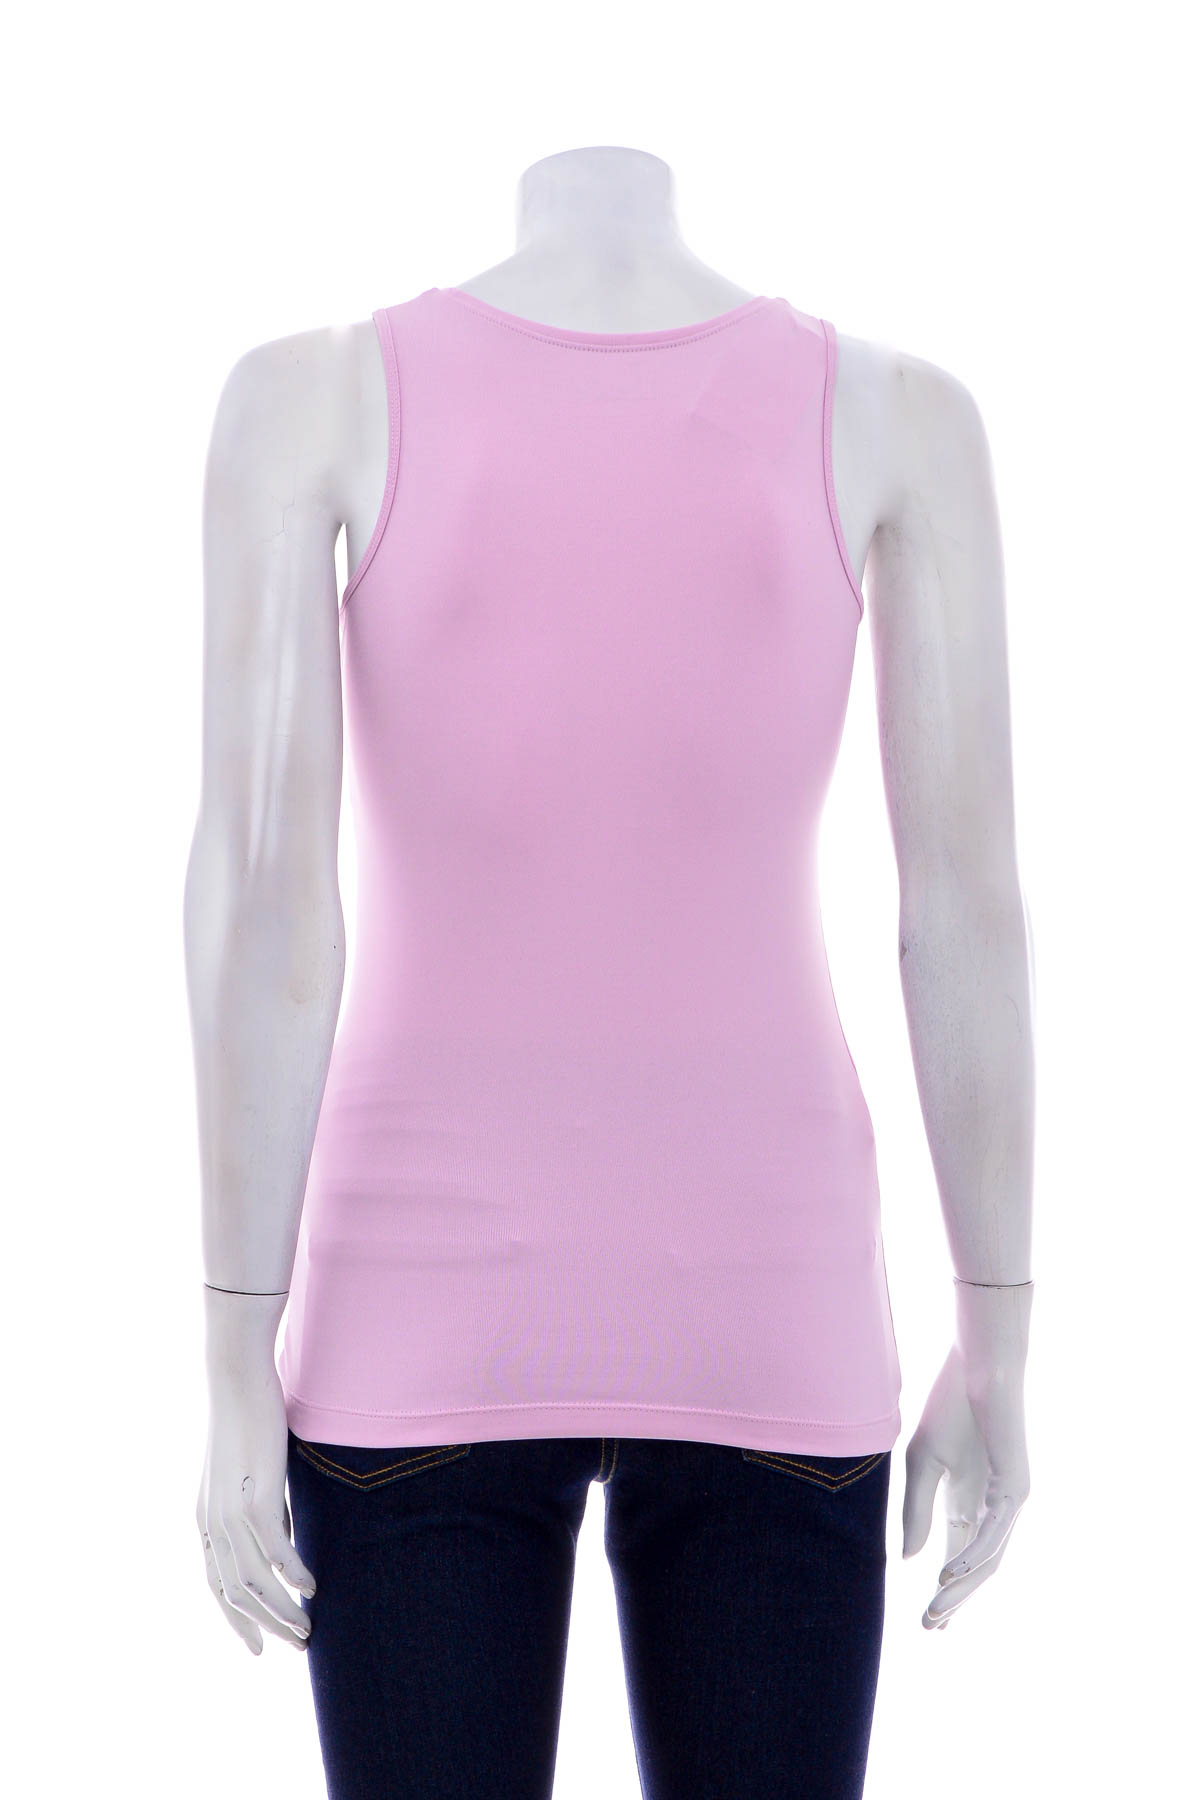 Women's top - Active by Tchibo - 1